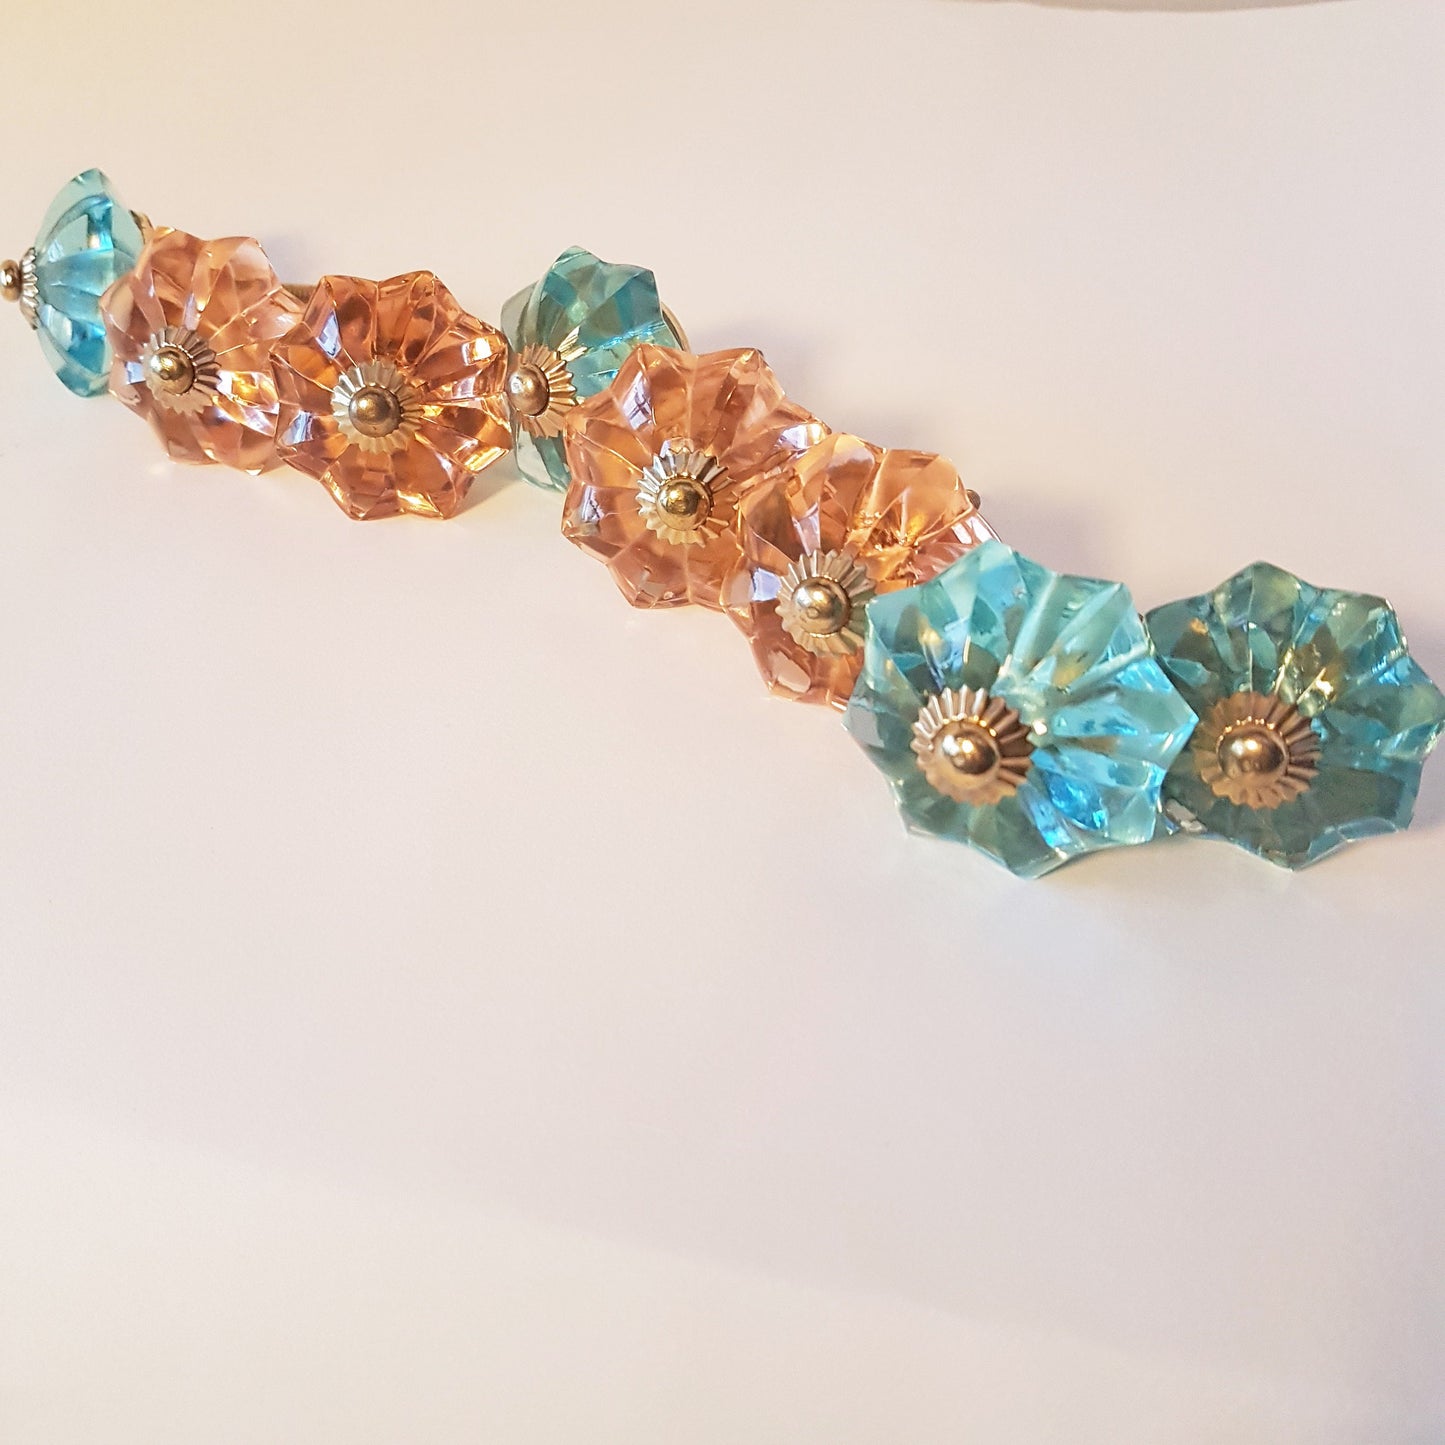 Set of 8 knobs: 4 faux aquamarine & 4 rose crystal look cabinet knobs. 8 piece collection of cupboard and drawer pulls for furniture. - Vintage India Ca